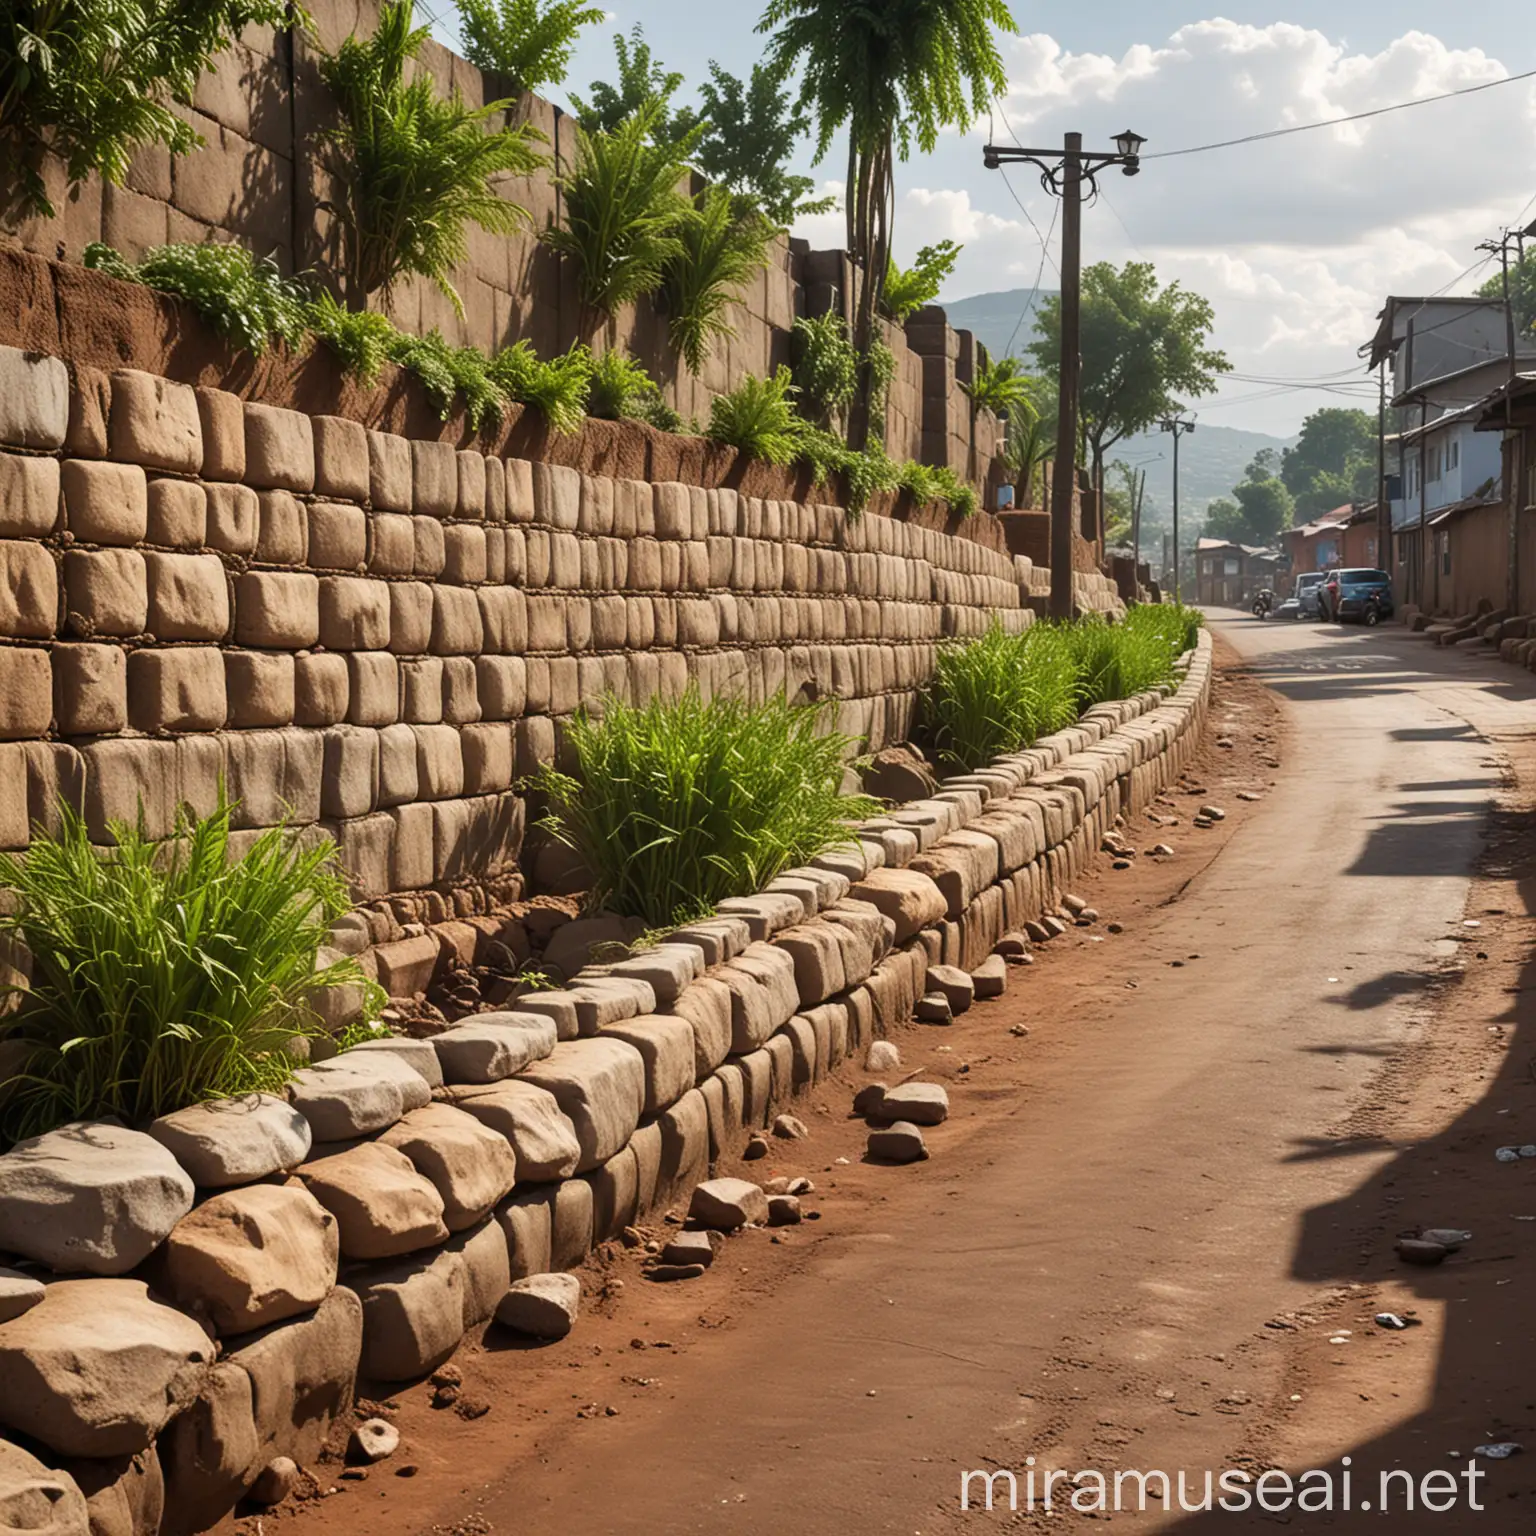 Realistic sunny image of this scene with a well printed stone retaining wall with planters and street lights in this narrow road with stormwater drainage on one side in a slum developed street in rwanda